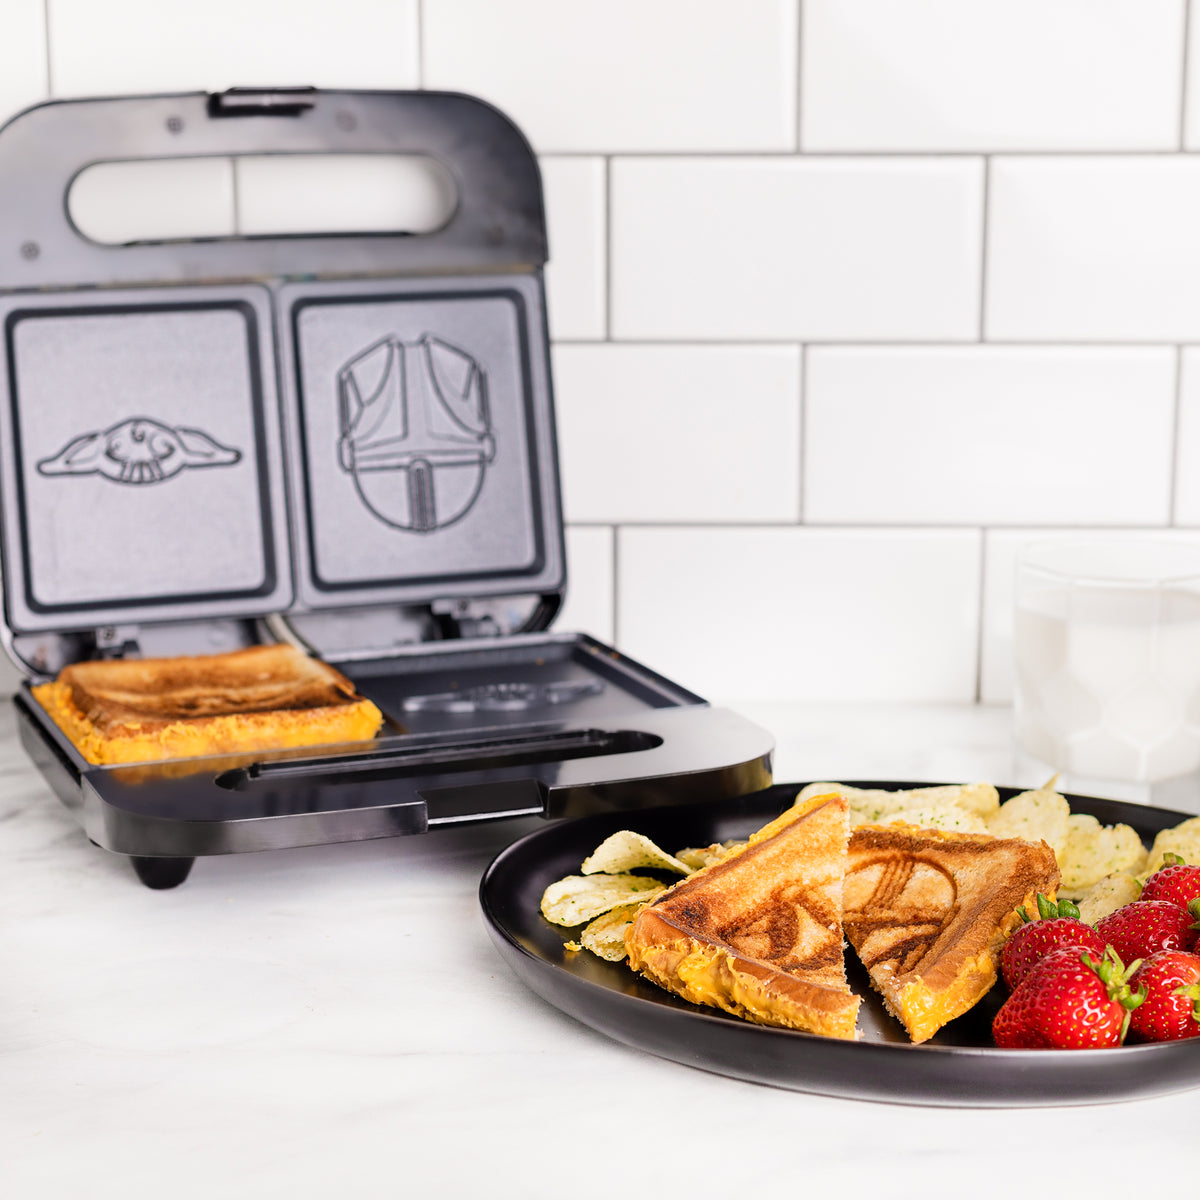 Star Wars The Mandalorian Grilled Cheese Maker